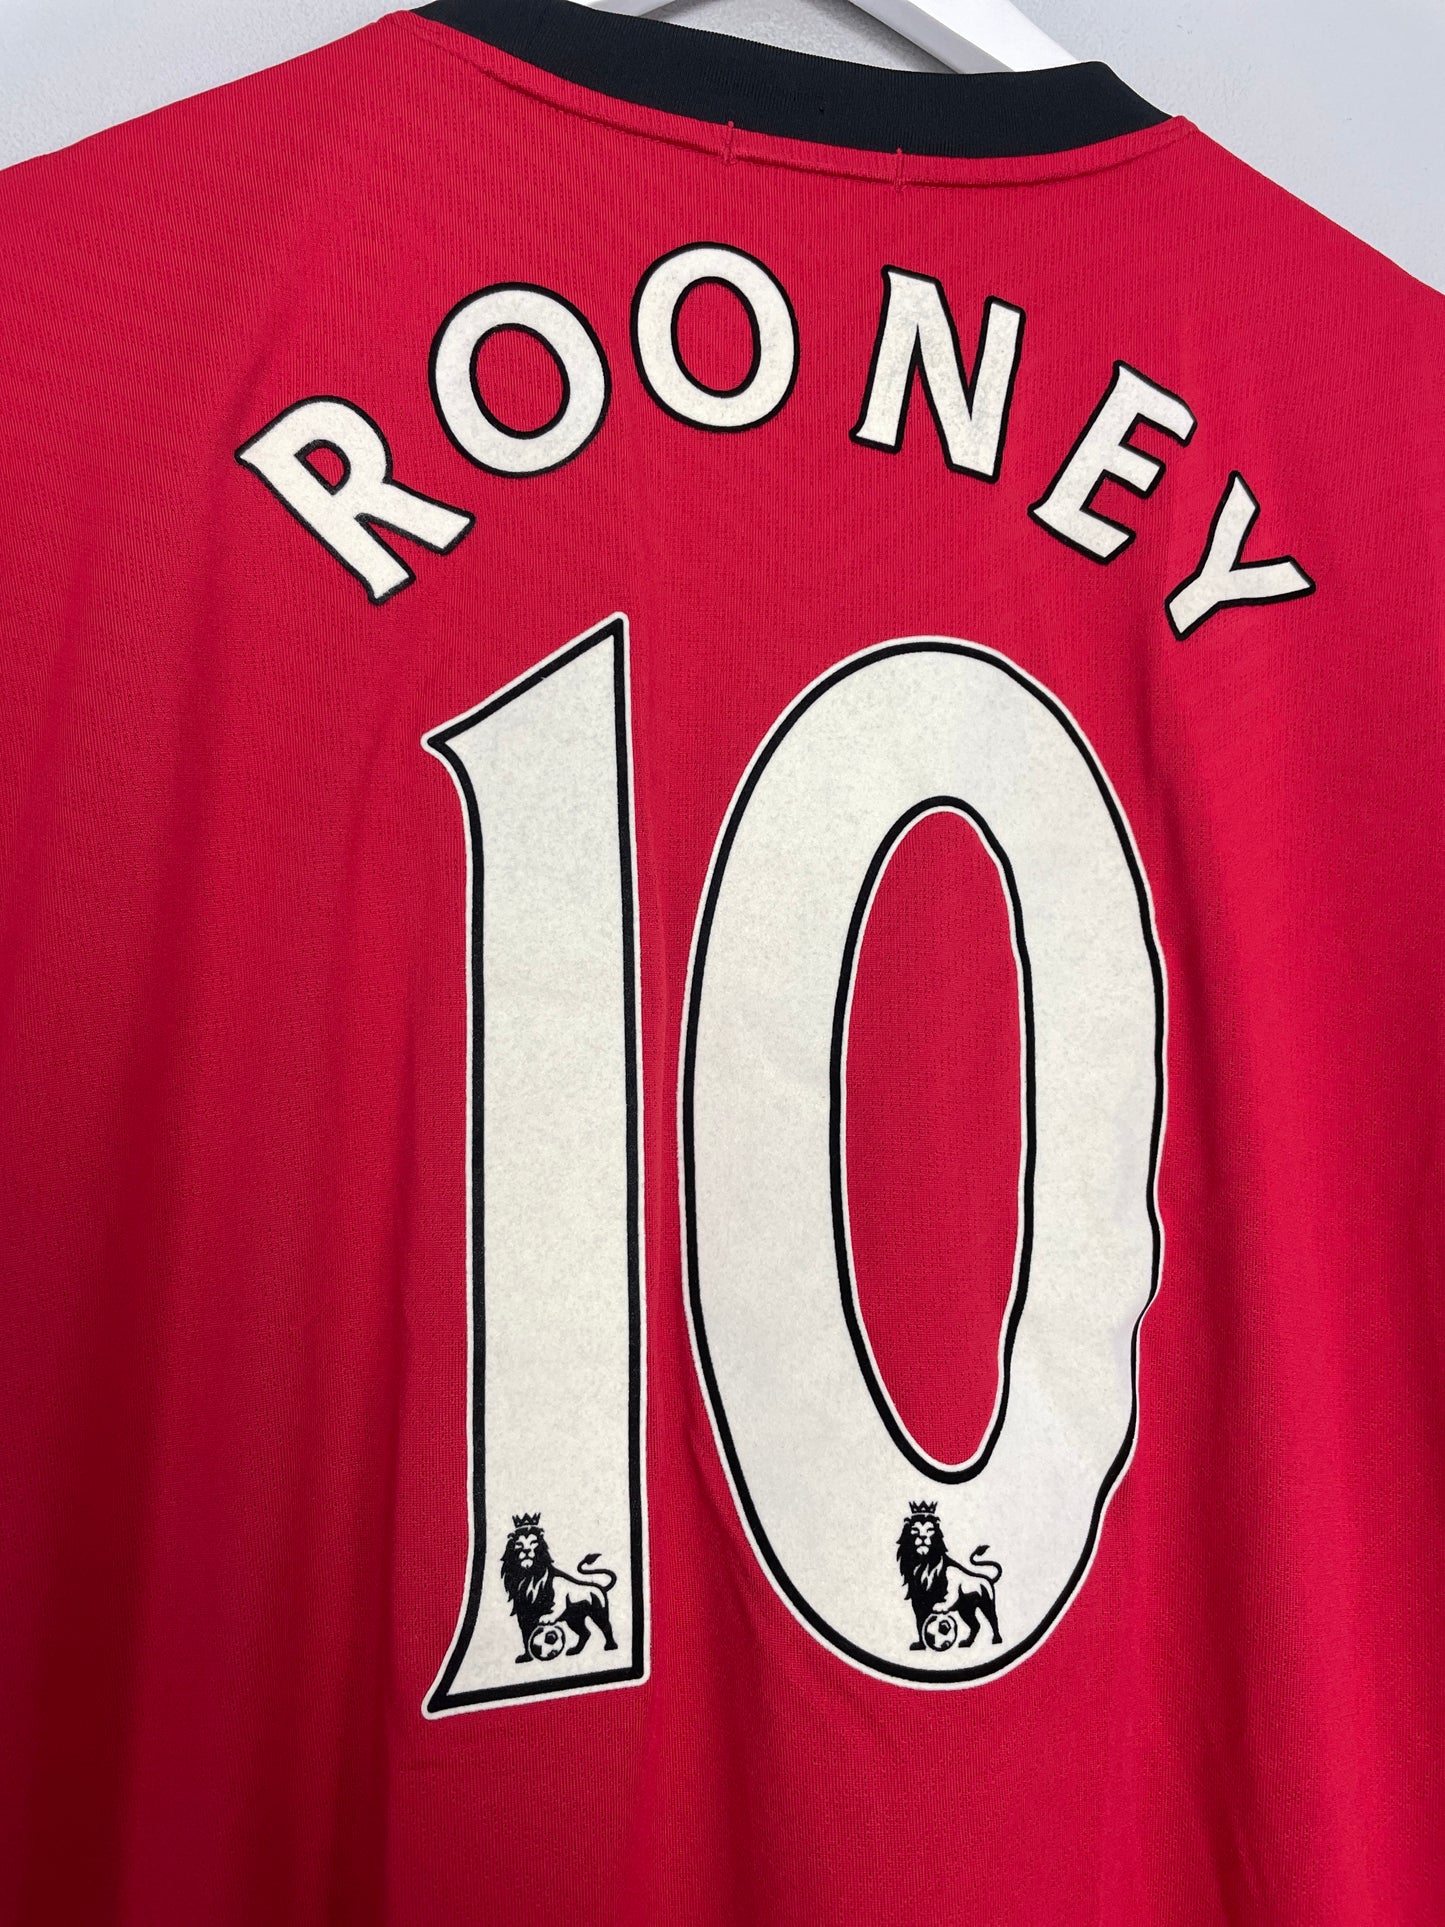 2009/10 MANCHESTER UNITED ROONEY #10 HOME SHIRT (XL) NIKE